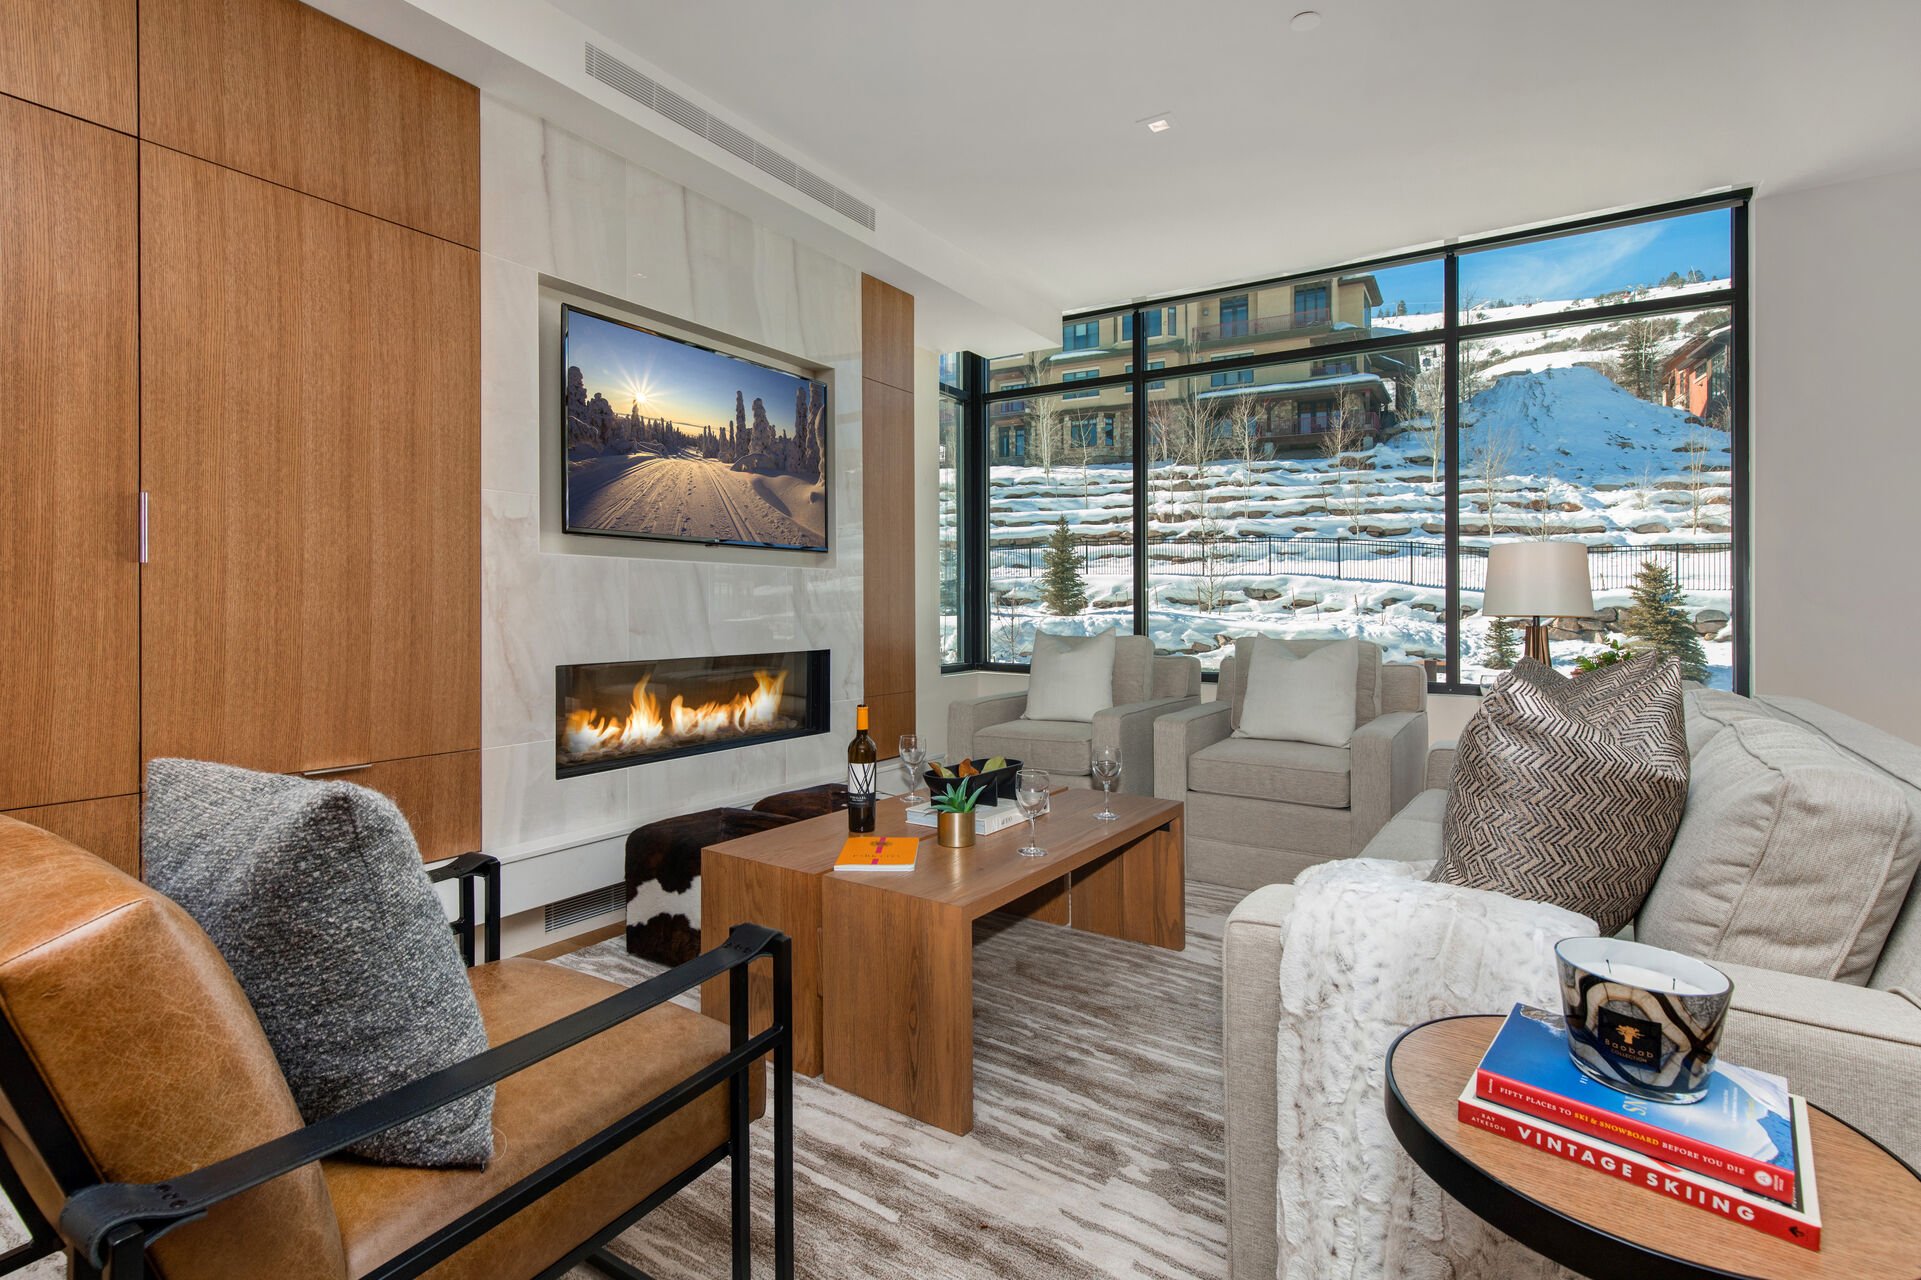 Living Room with mountain contemporary furnishings, sleeper sofa, gas fireplace, LG smart tv, and beautiful pool and resort views from the private balcony